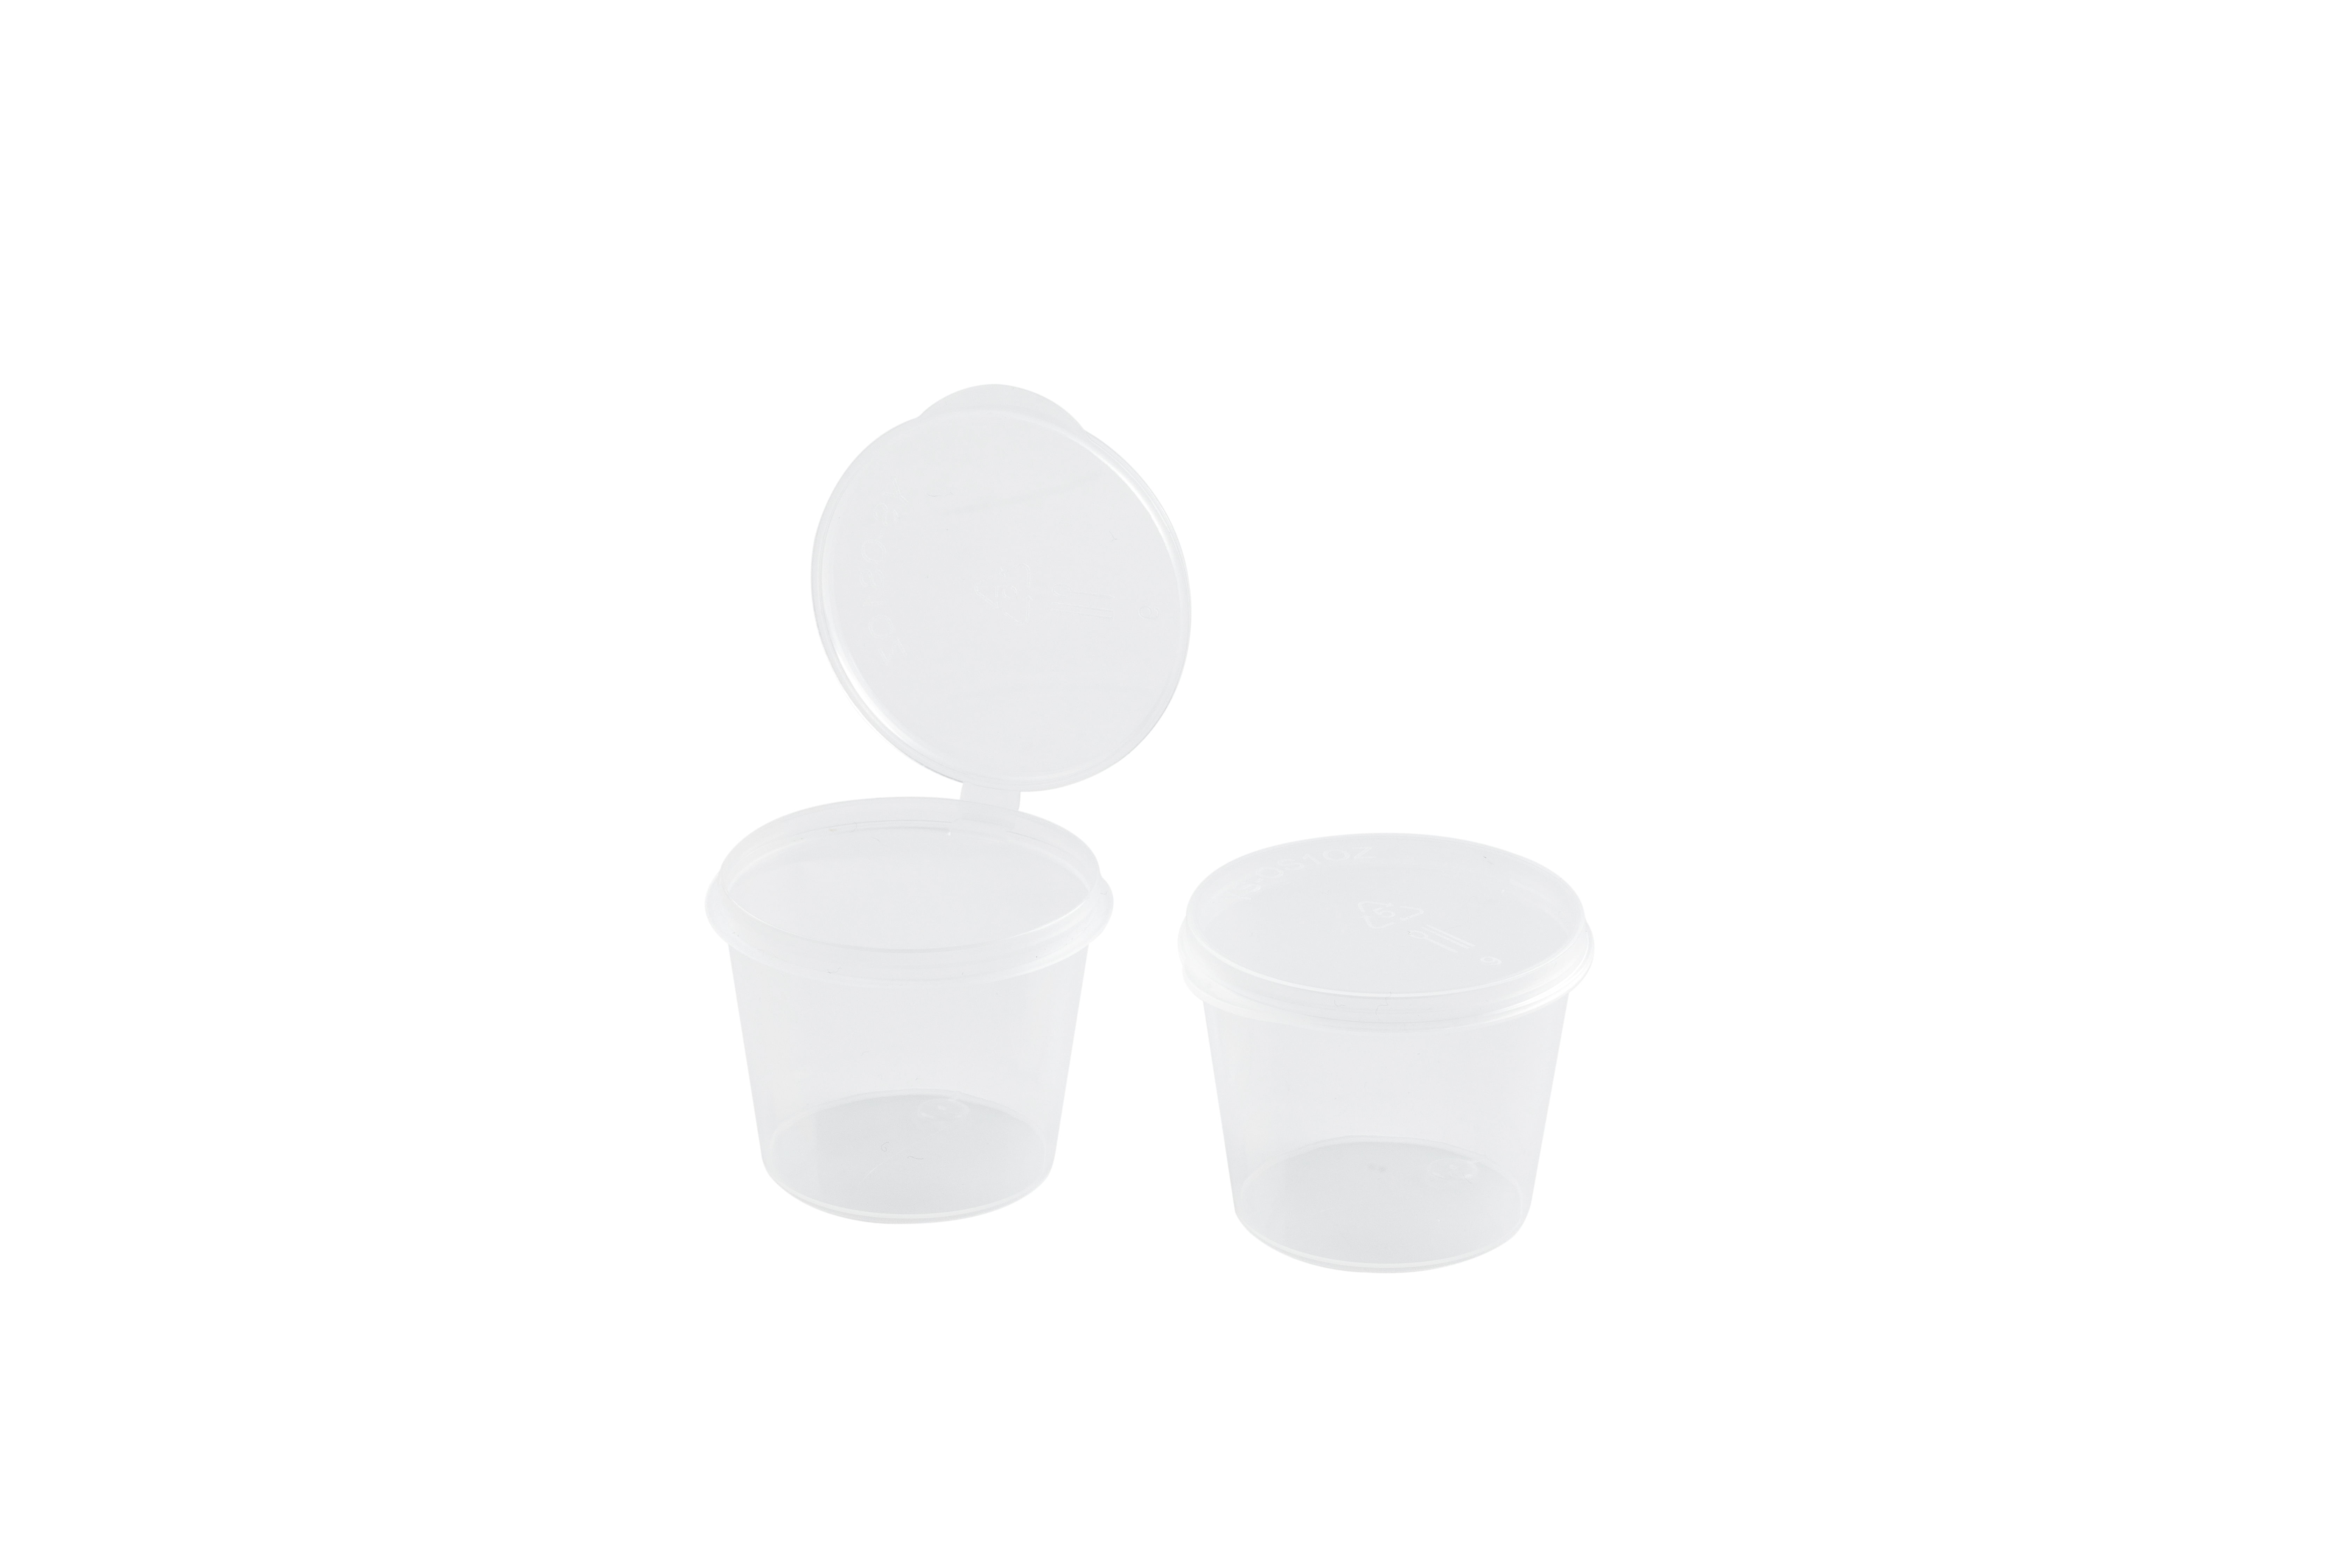 Restaurantware Base 1.5 Ounce Sauce Cups, 2000 Microwave-Safe Condiment Cups - Crack-Resistant, Disposable, Clear Plastic Portion Cups, for Samples